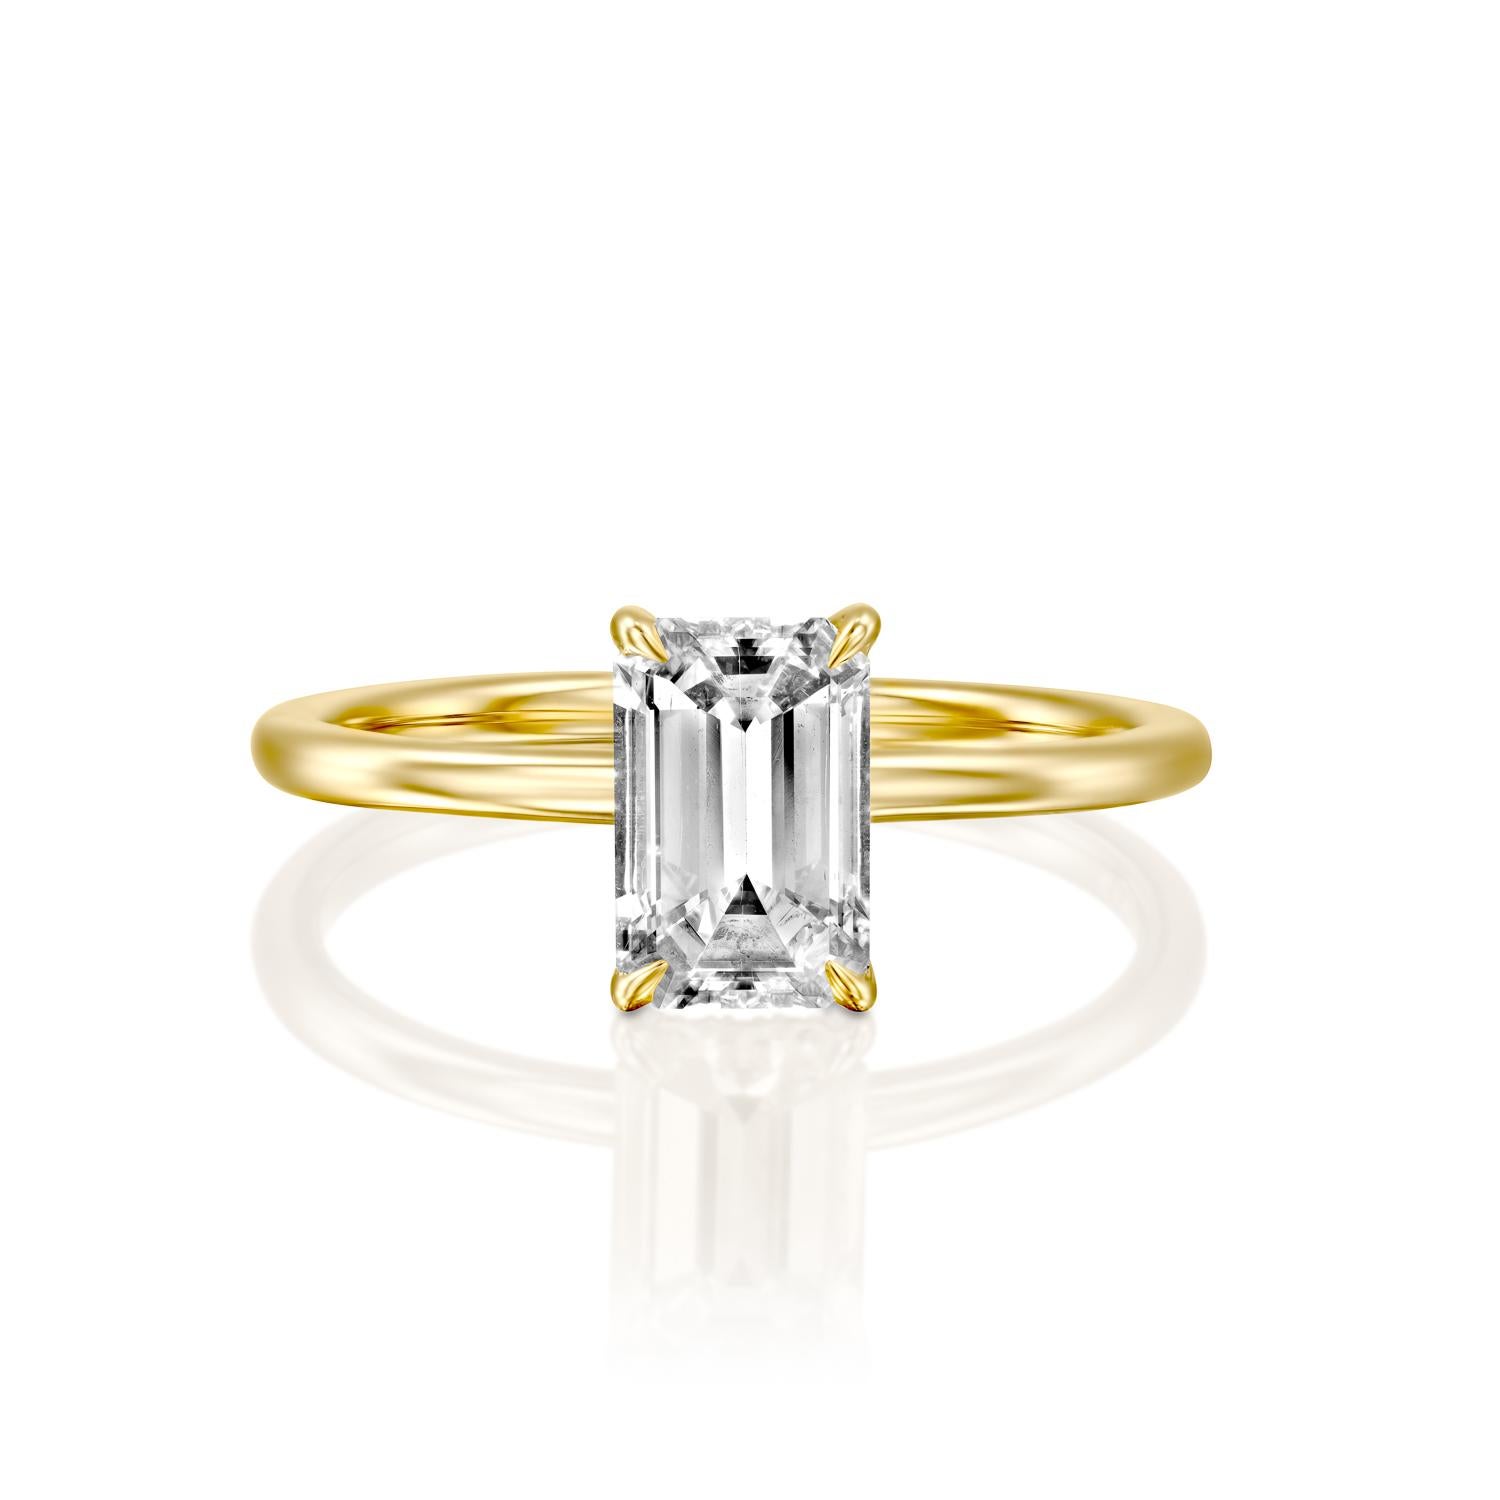 This breathtaking ring features a solitaire GIA certified diamond. Ring features a 3/4 carat emerald cut 100% eye clean natural diamond of F-G color and VS2-SI1 clarity. Set in a sleek, 18K yellow gold, solitaire ring with a 4-prong setting, this